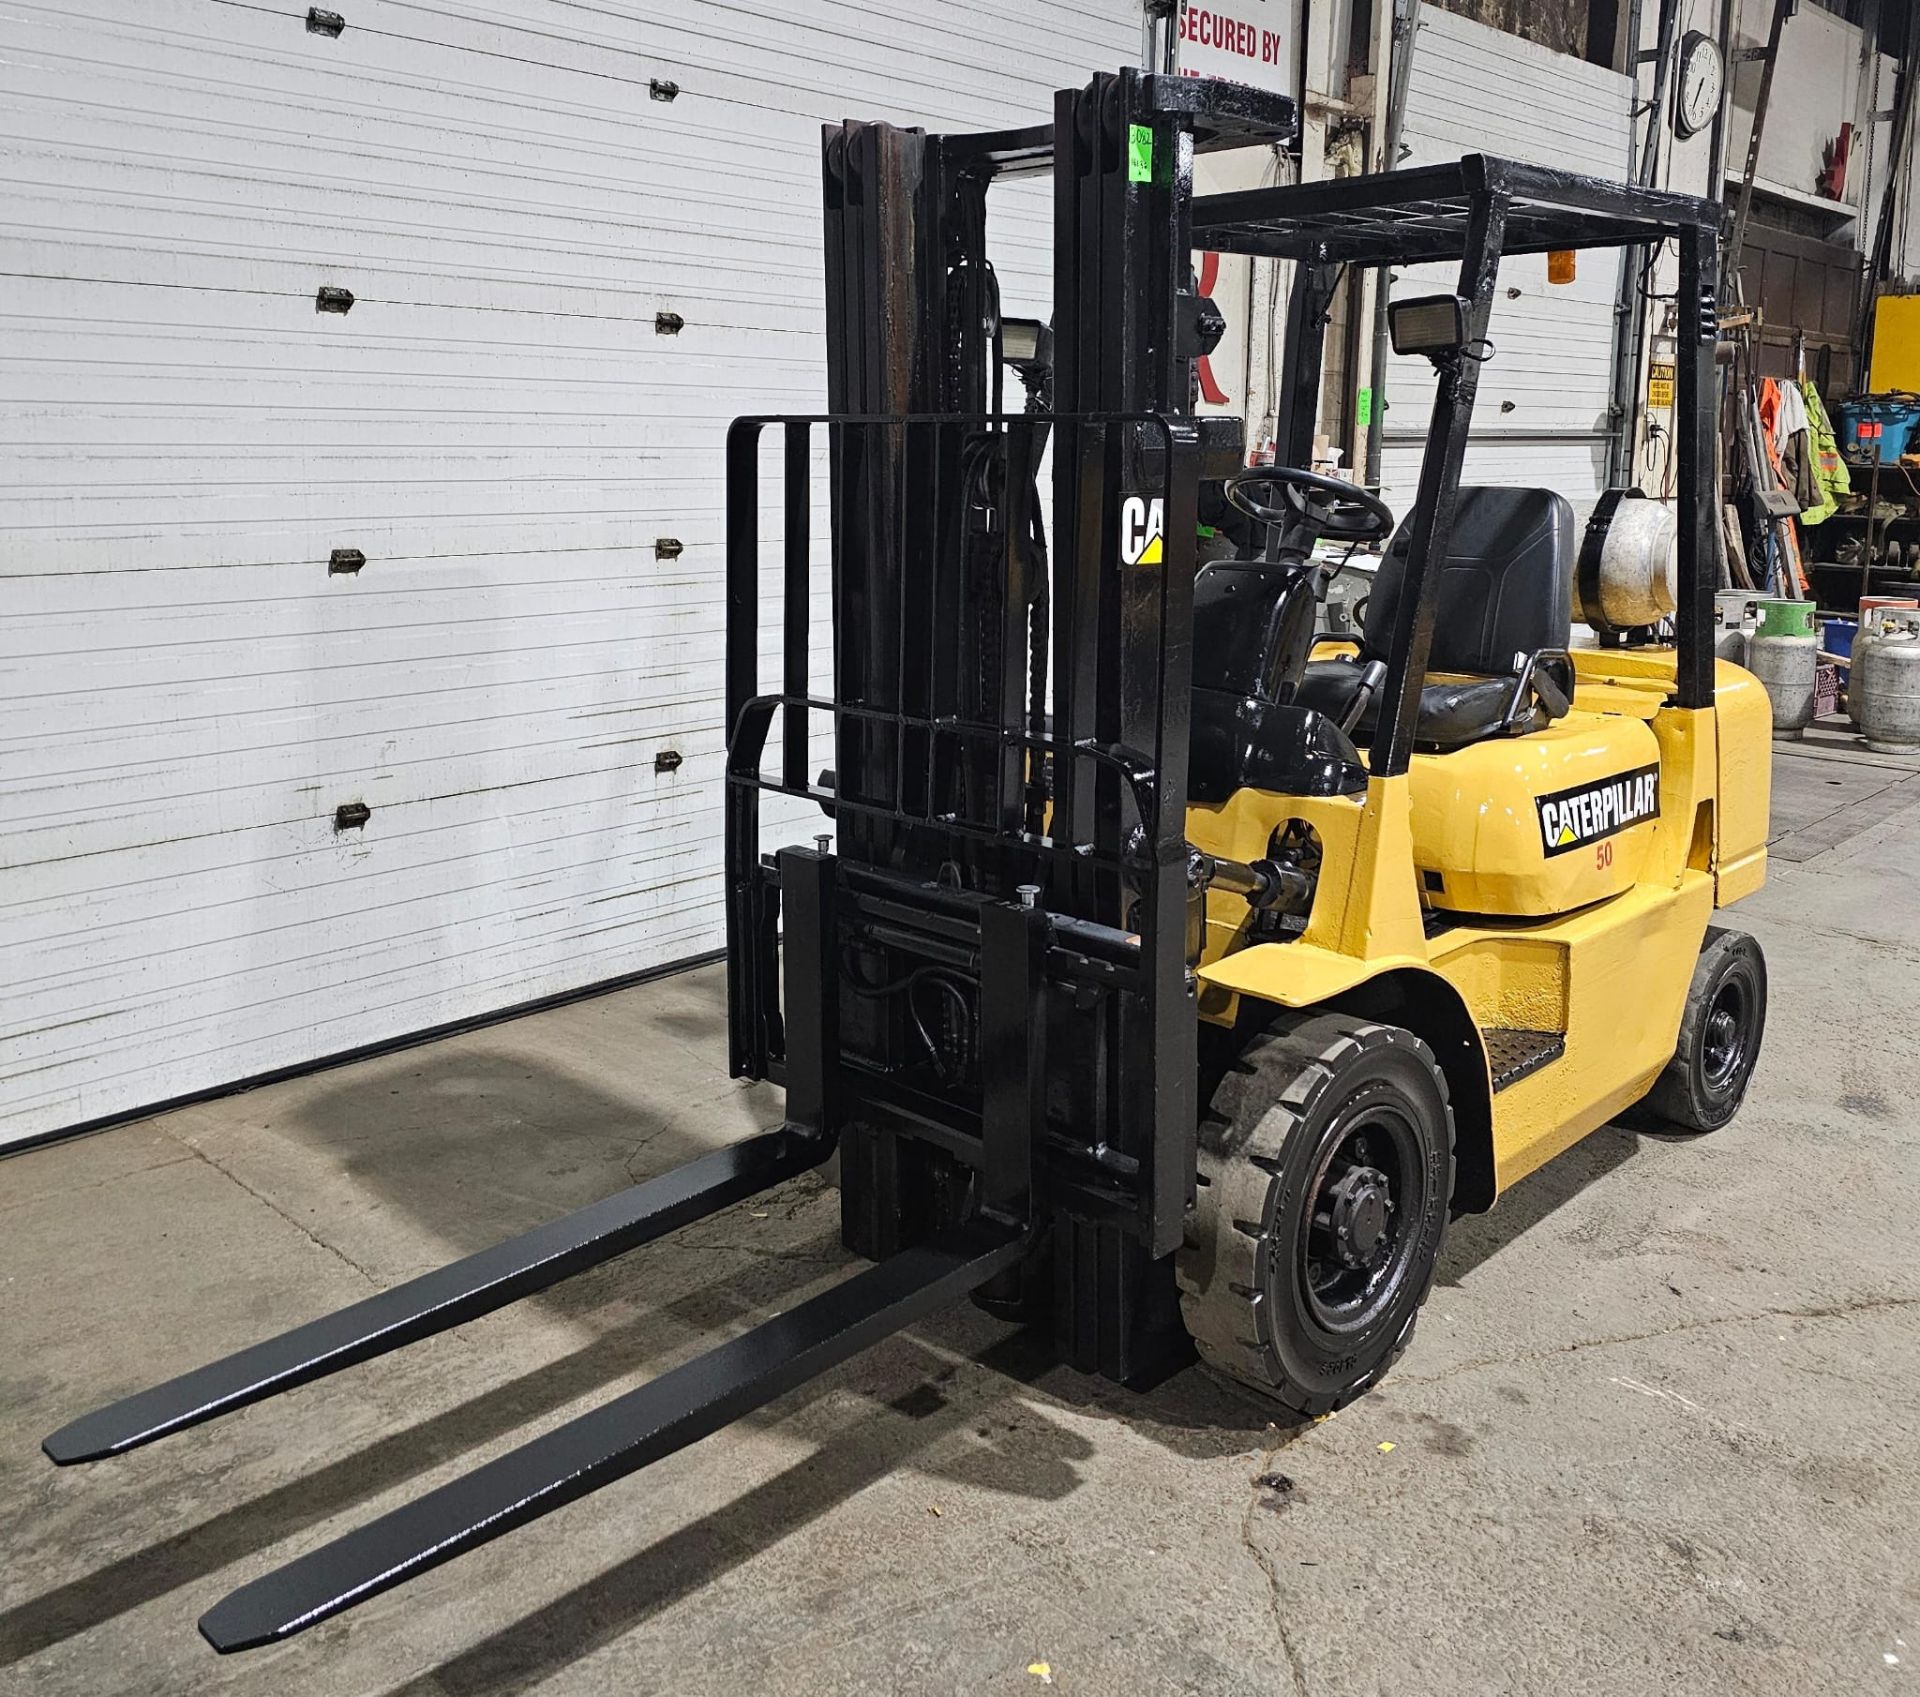 CAT 5,000lbbs Capacity OUTDOOR LPG (propane) Forklift with 3-STAGE MAST sideshift (no propane tank - Image 3 of 3